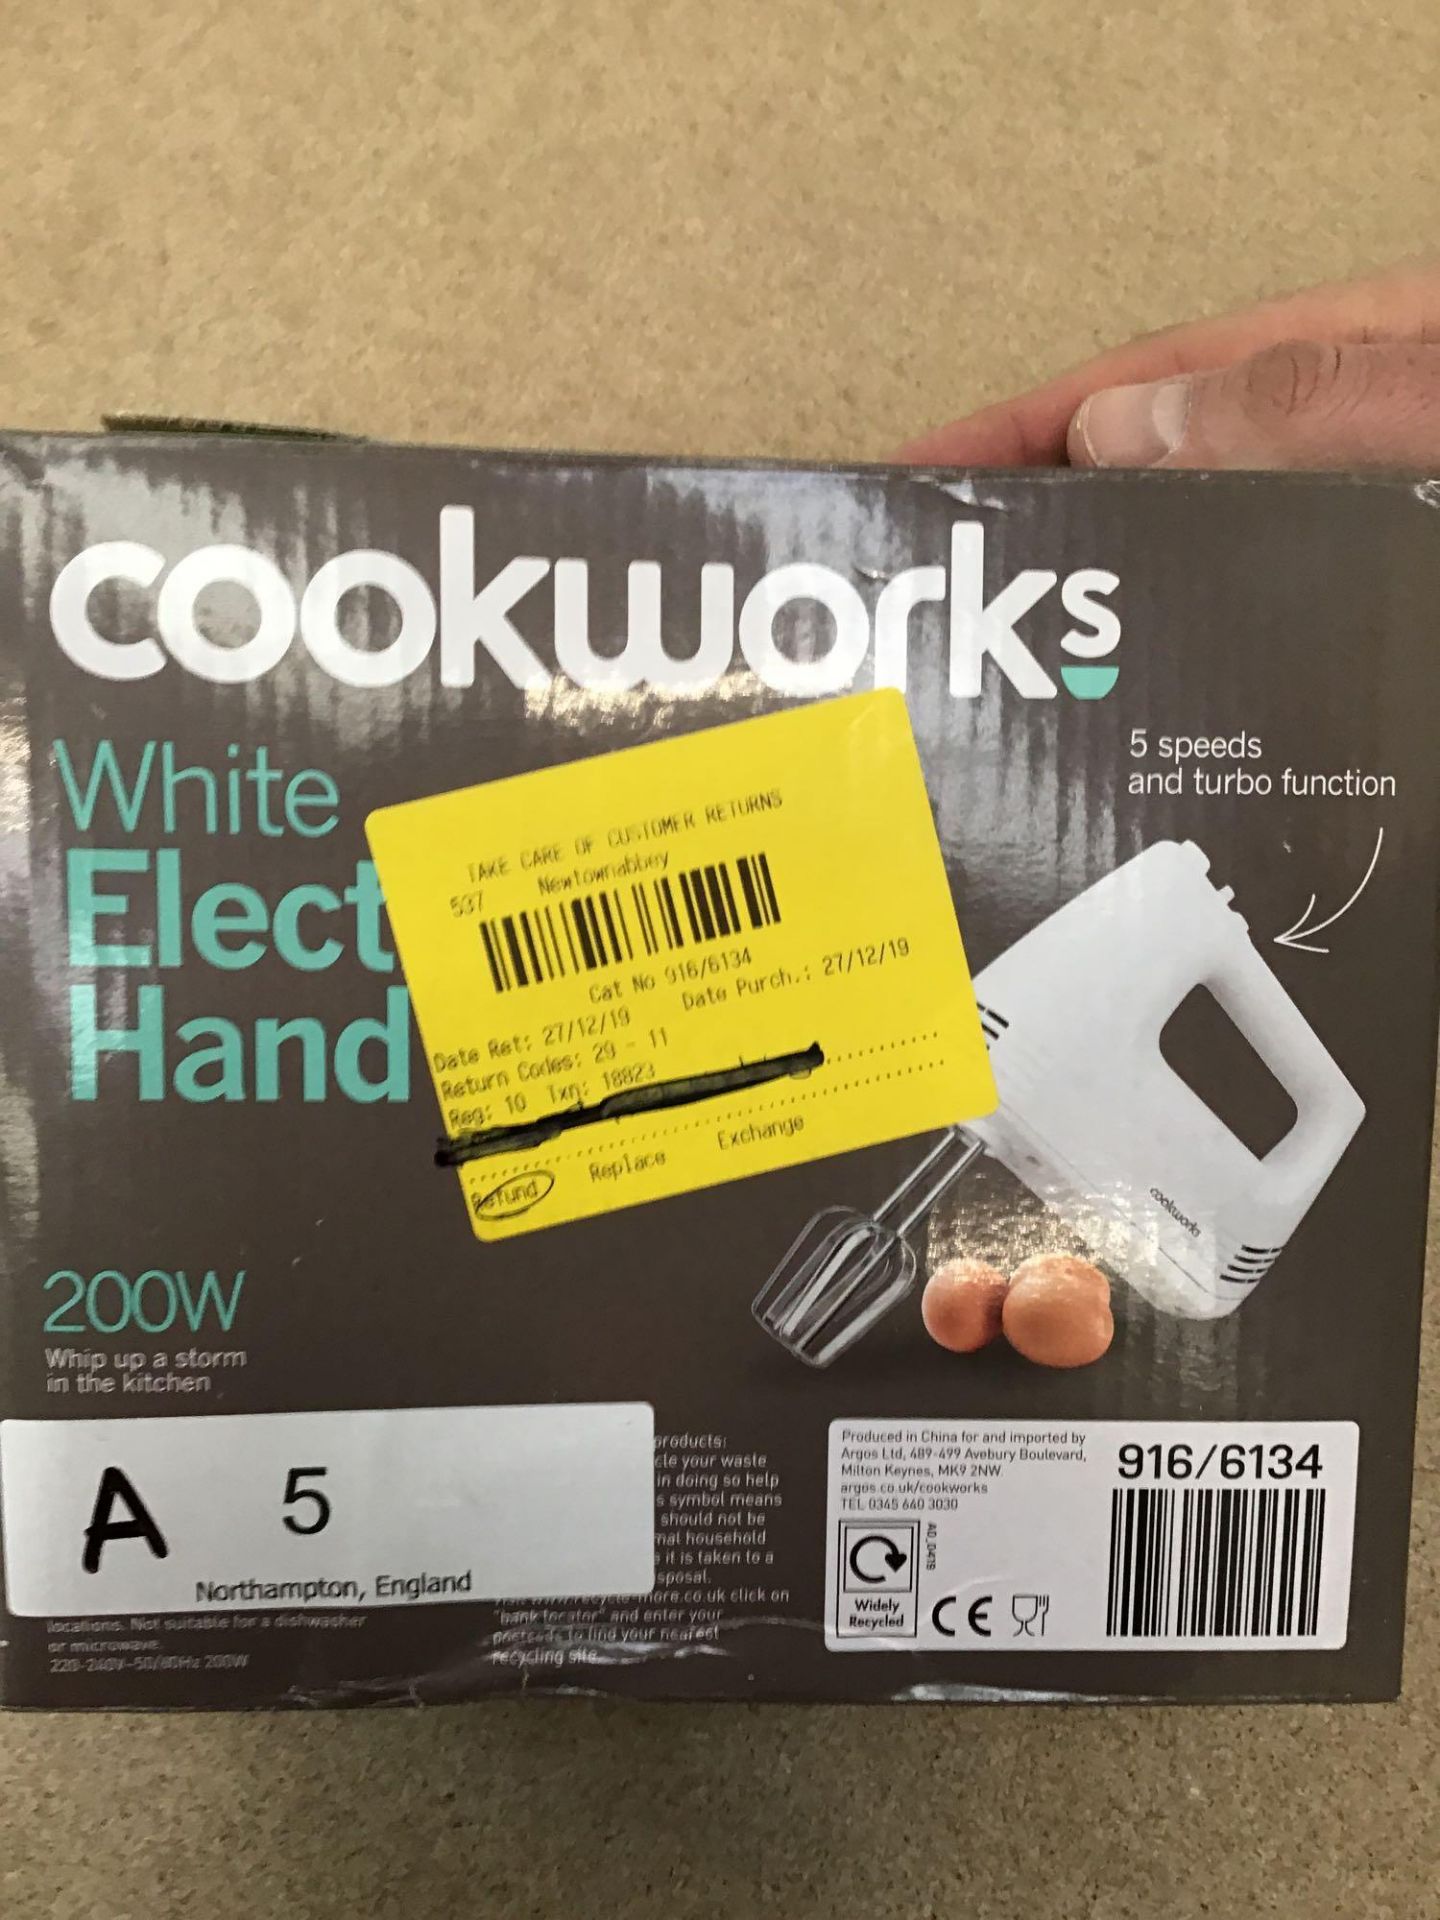 Cookworks Hand Mixer - White, £9.99 RRP - Image 5 of 5